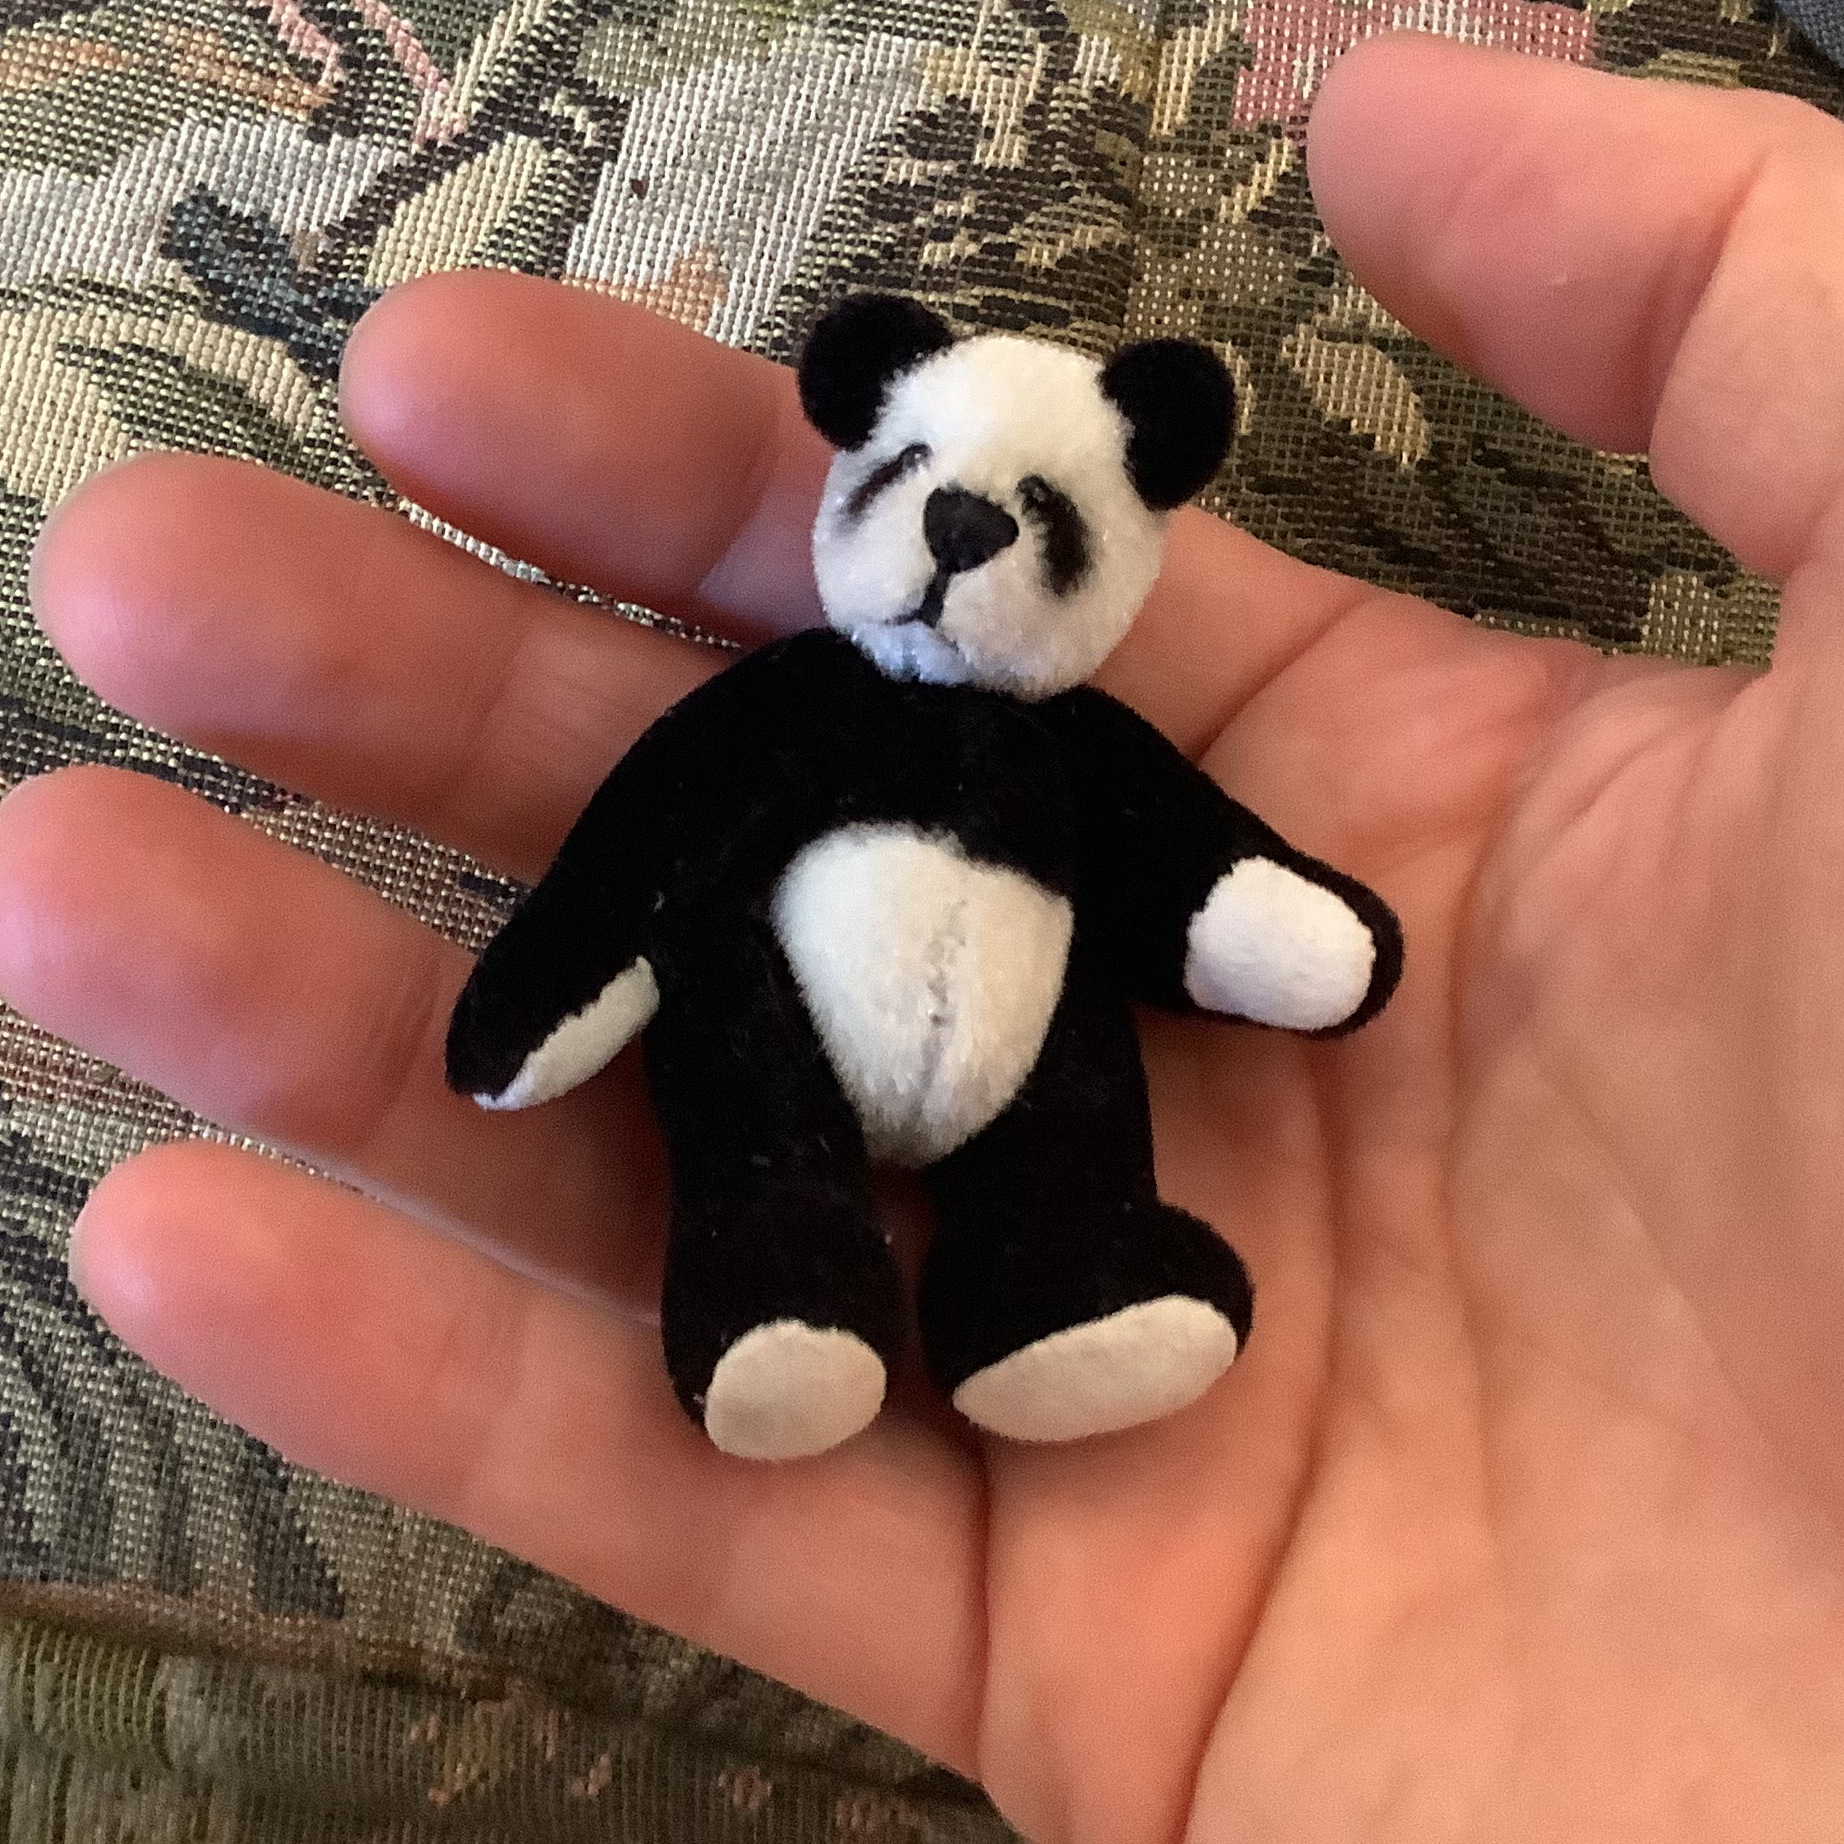 small panda doll with jointed arms and legs